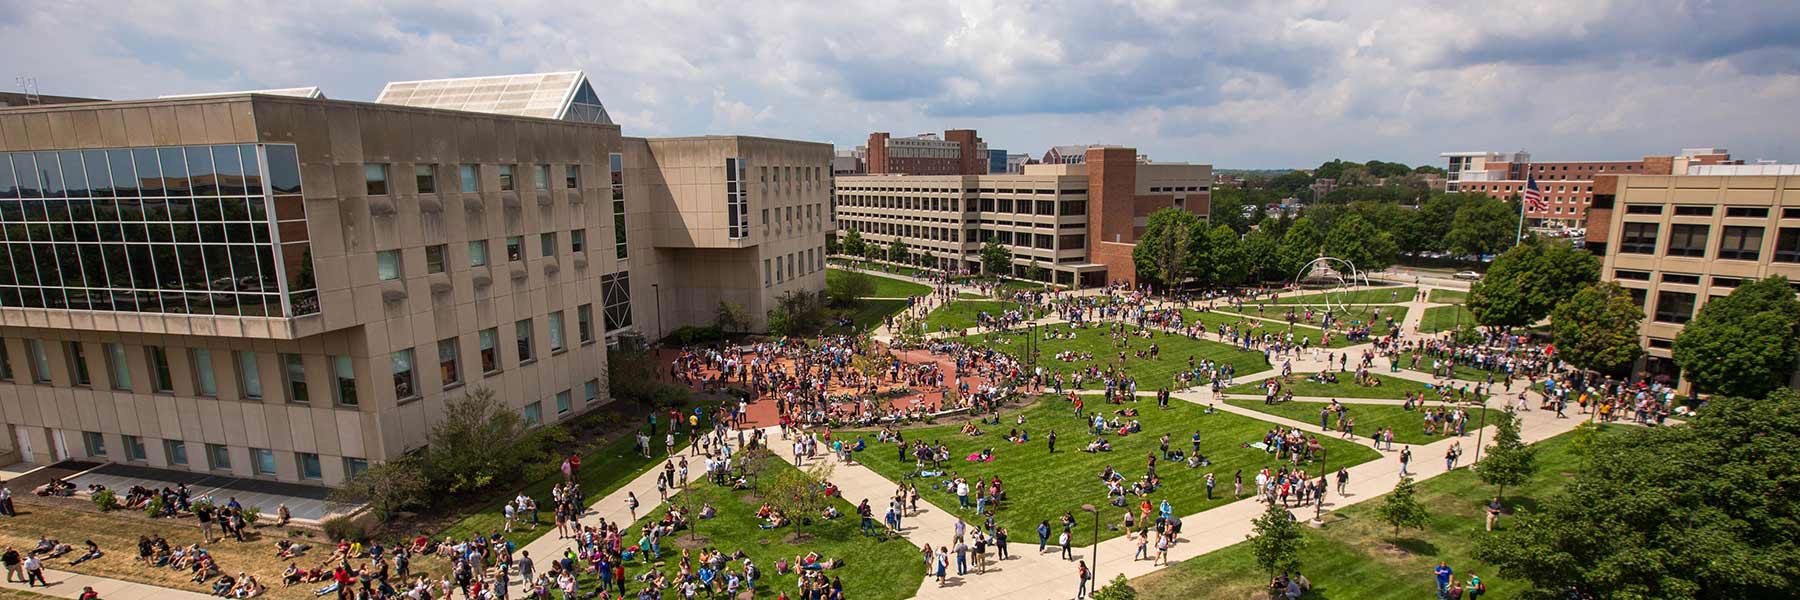 Students gather in front of University Library during the solar eclipse in 2017.